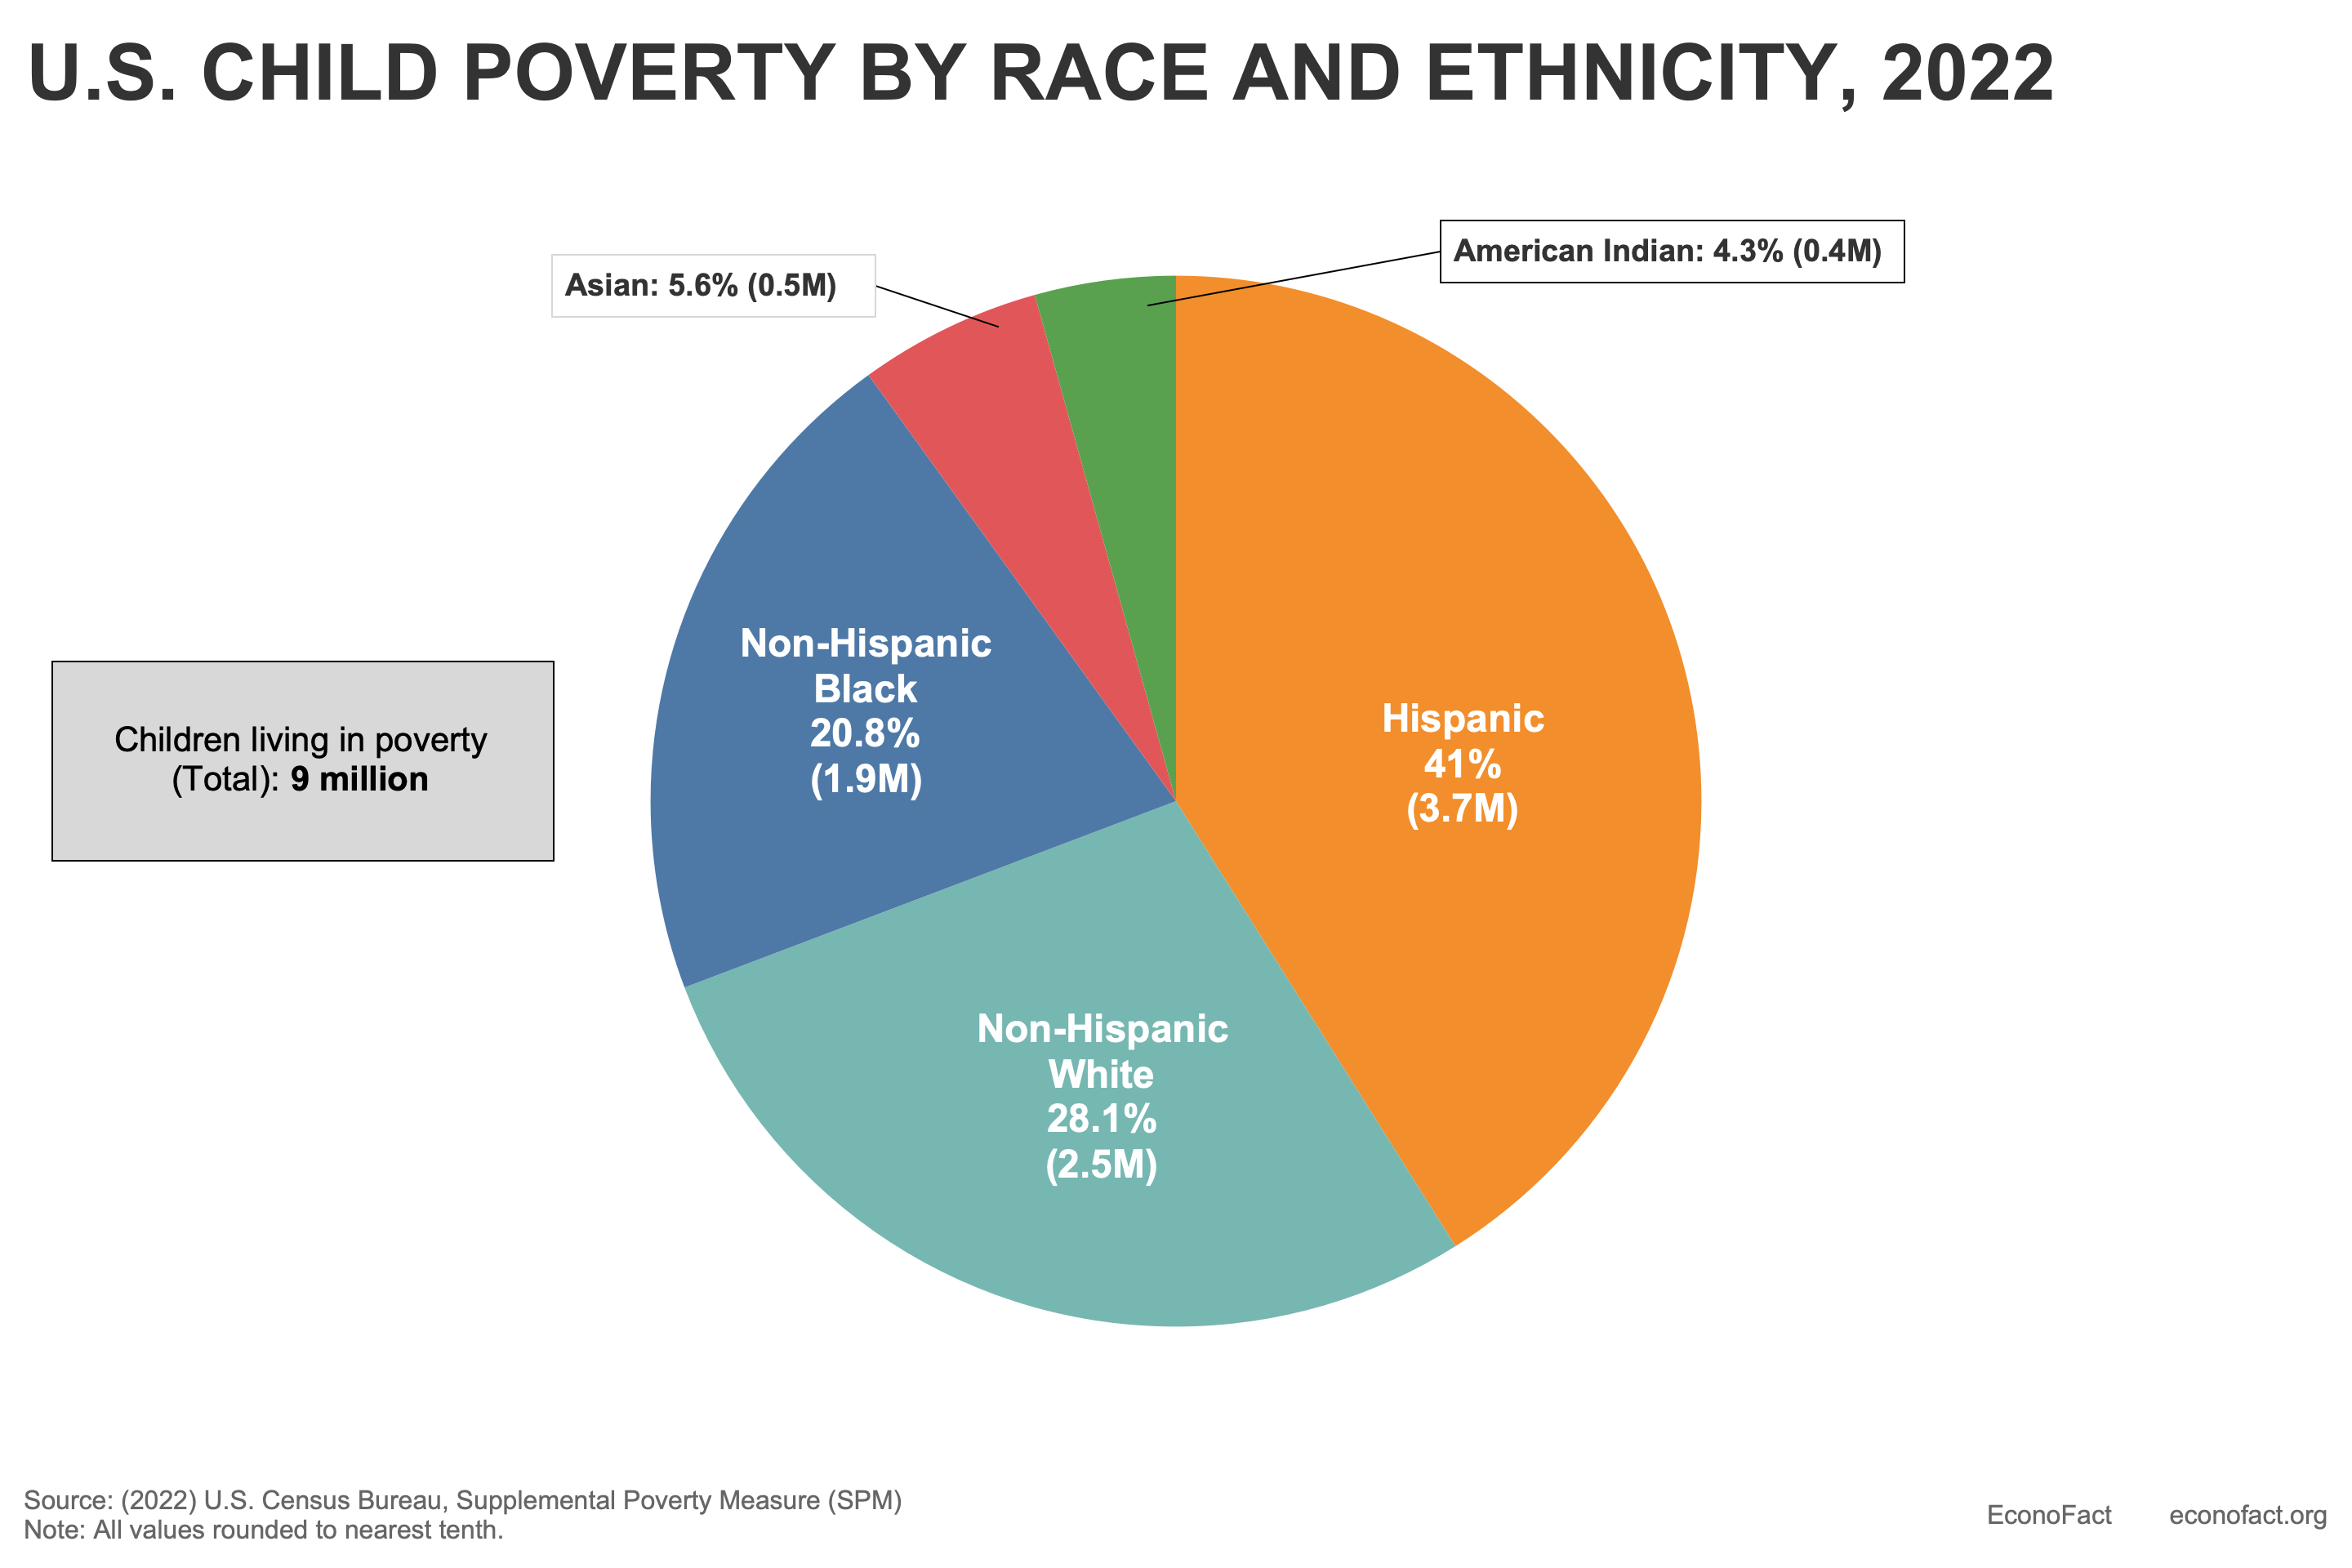 U.S. Child Poverty by Race and Ethnicity, 2022